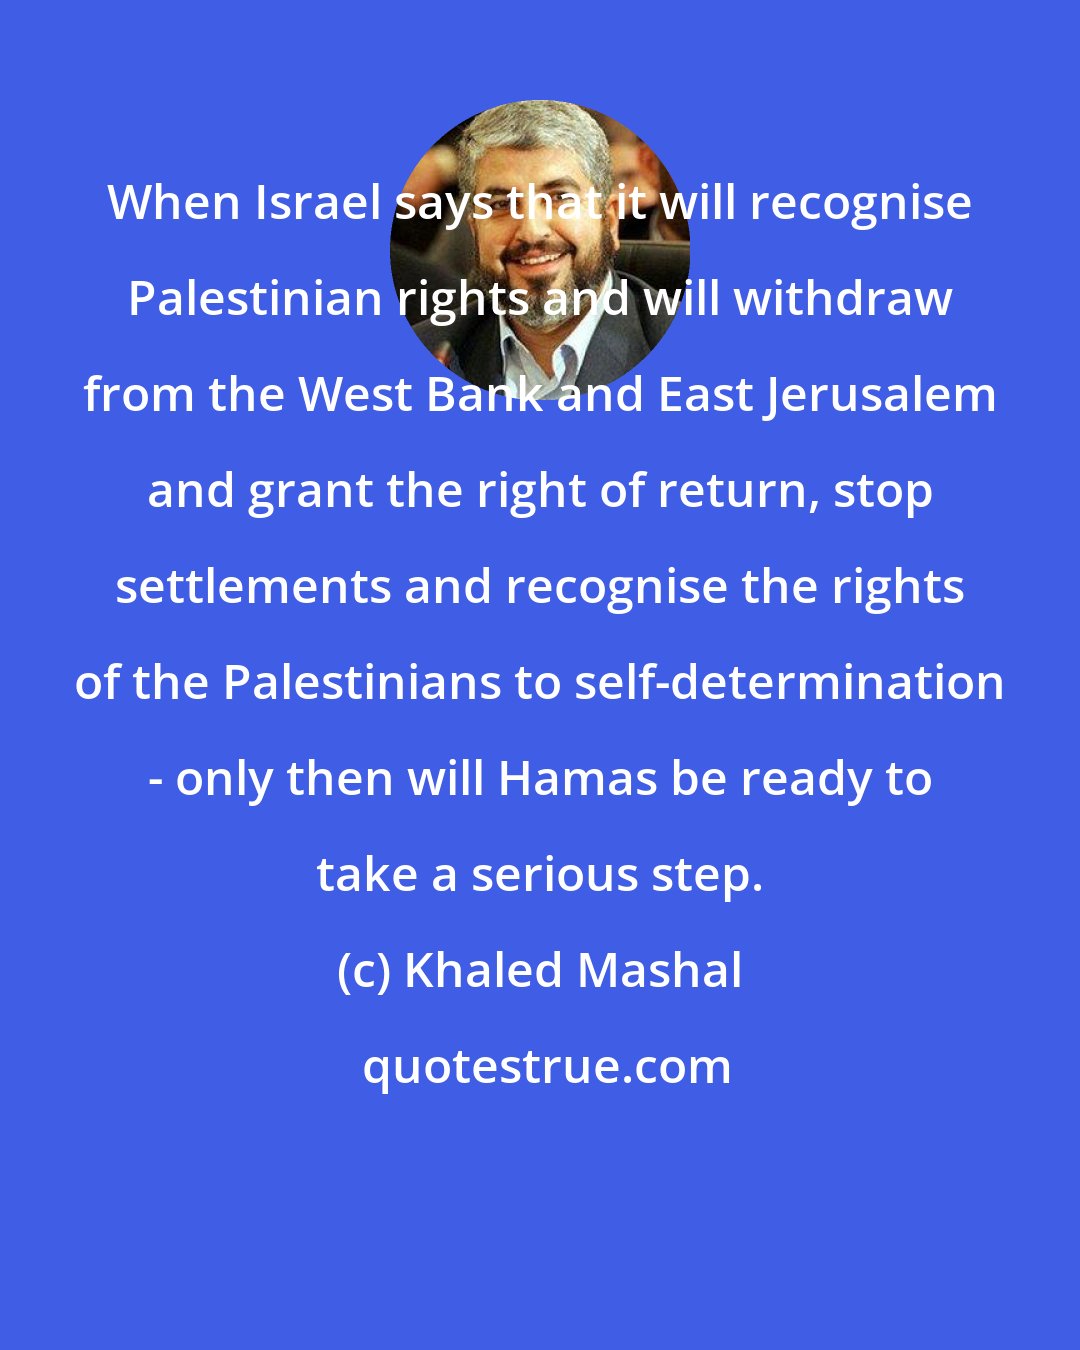 Khaled Mashal: When Israel says that it will recognise Palestinian rights and will withdraw from the West Bank and East Jerusalem and grant the right of return, stop settlements and recognise the rights of the Palestinians to self-determination - only then will Hamas be ready to take a serious step.